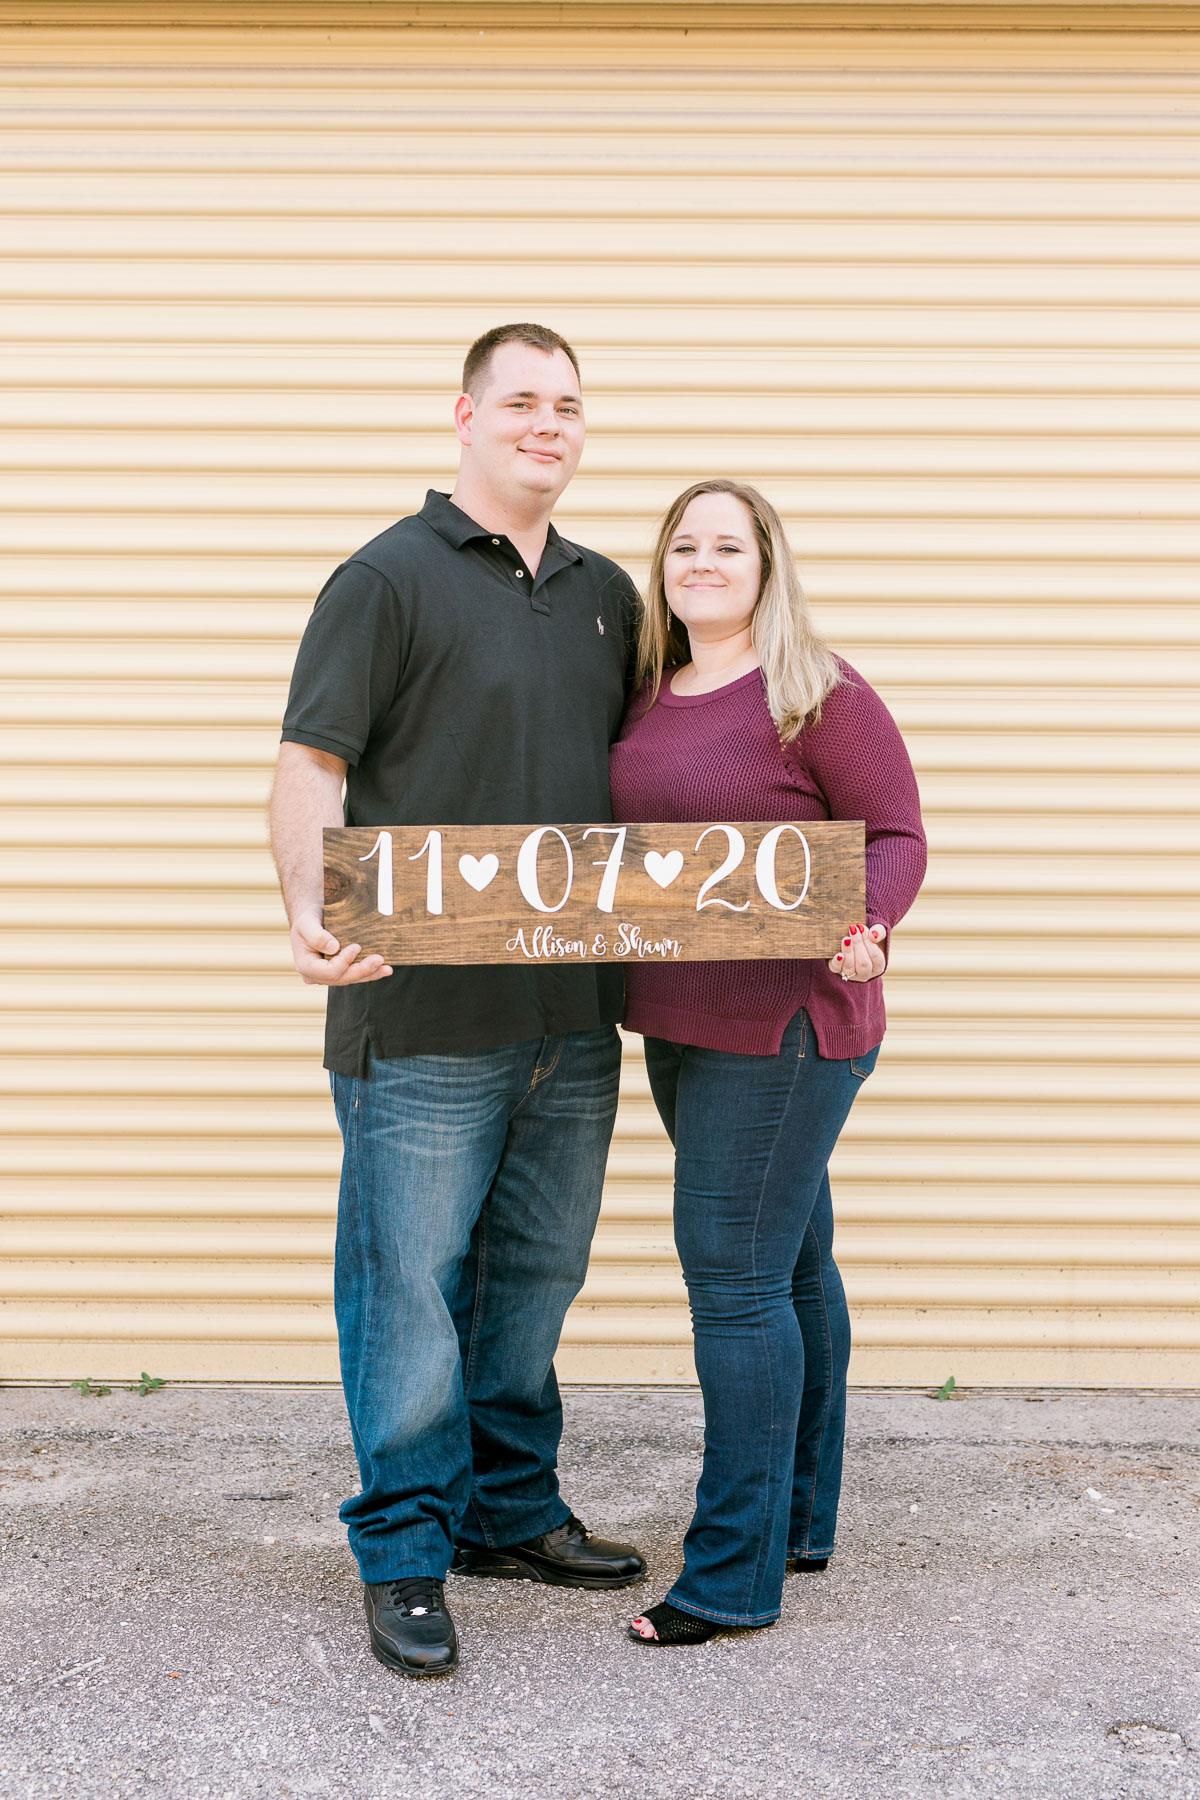 Couple holding a wood sign with their wedding date on it